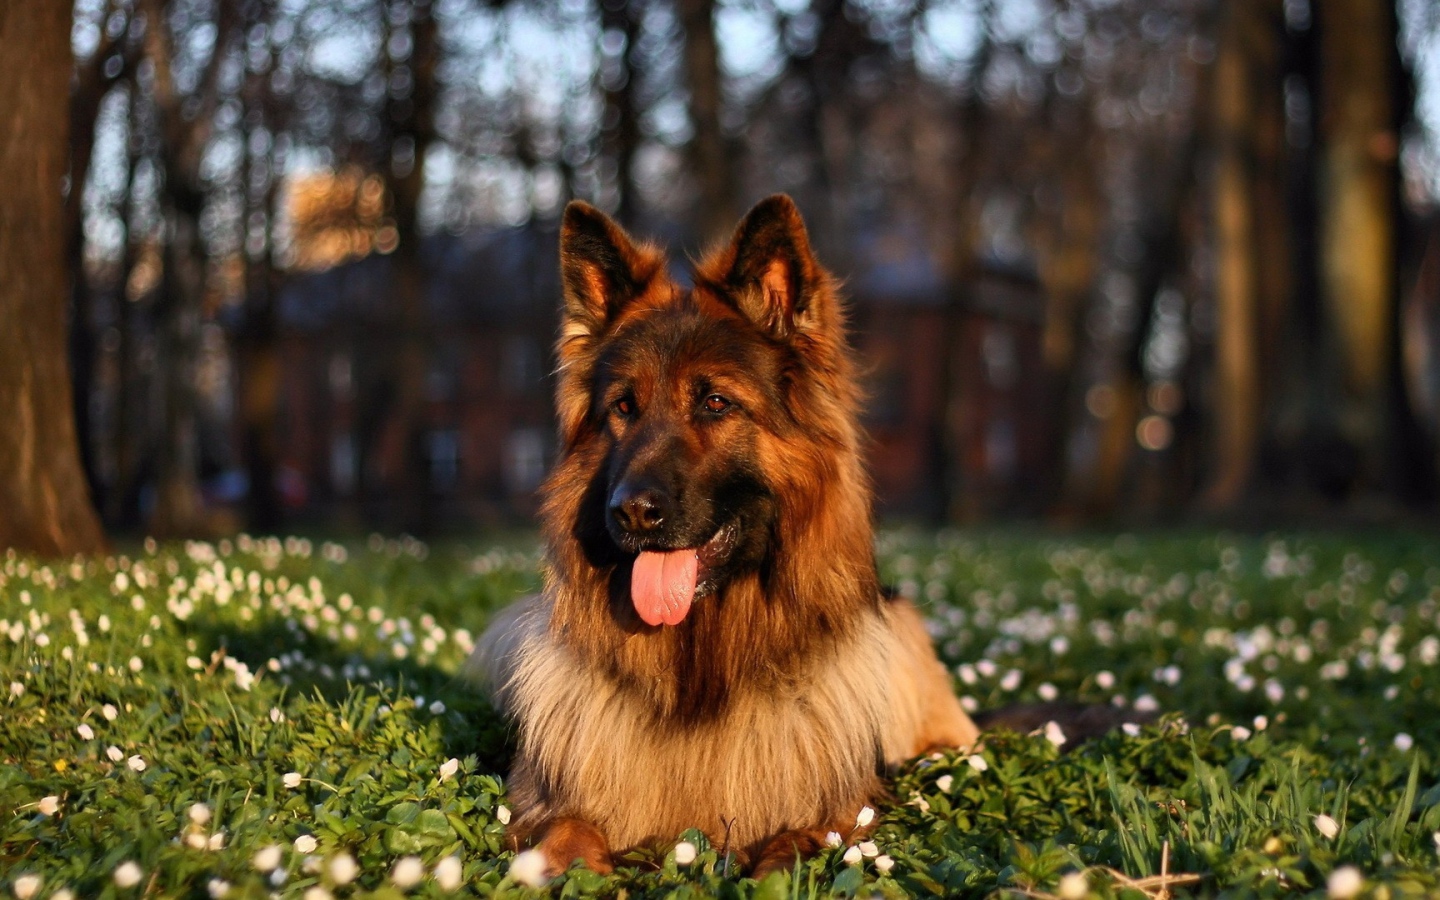 German shepherd with tongue hanging out lying on the grass